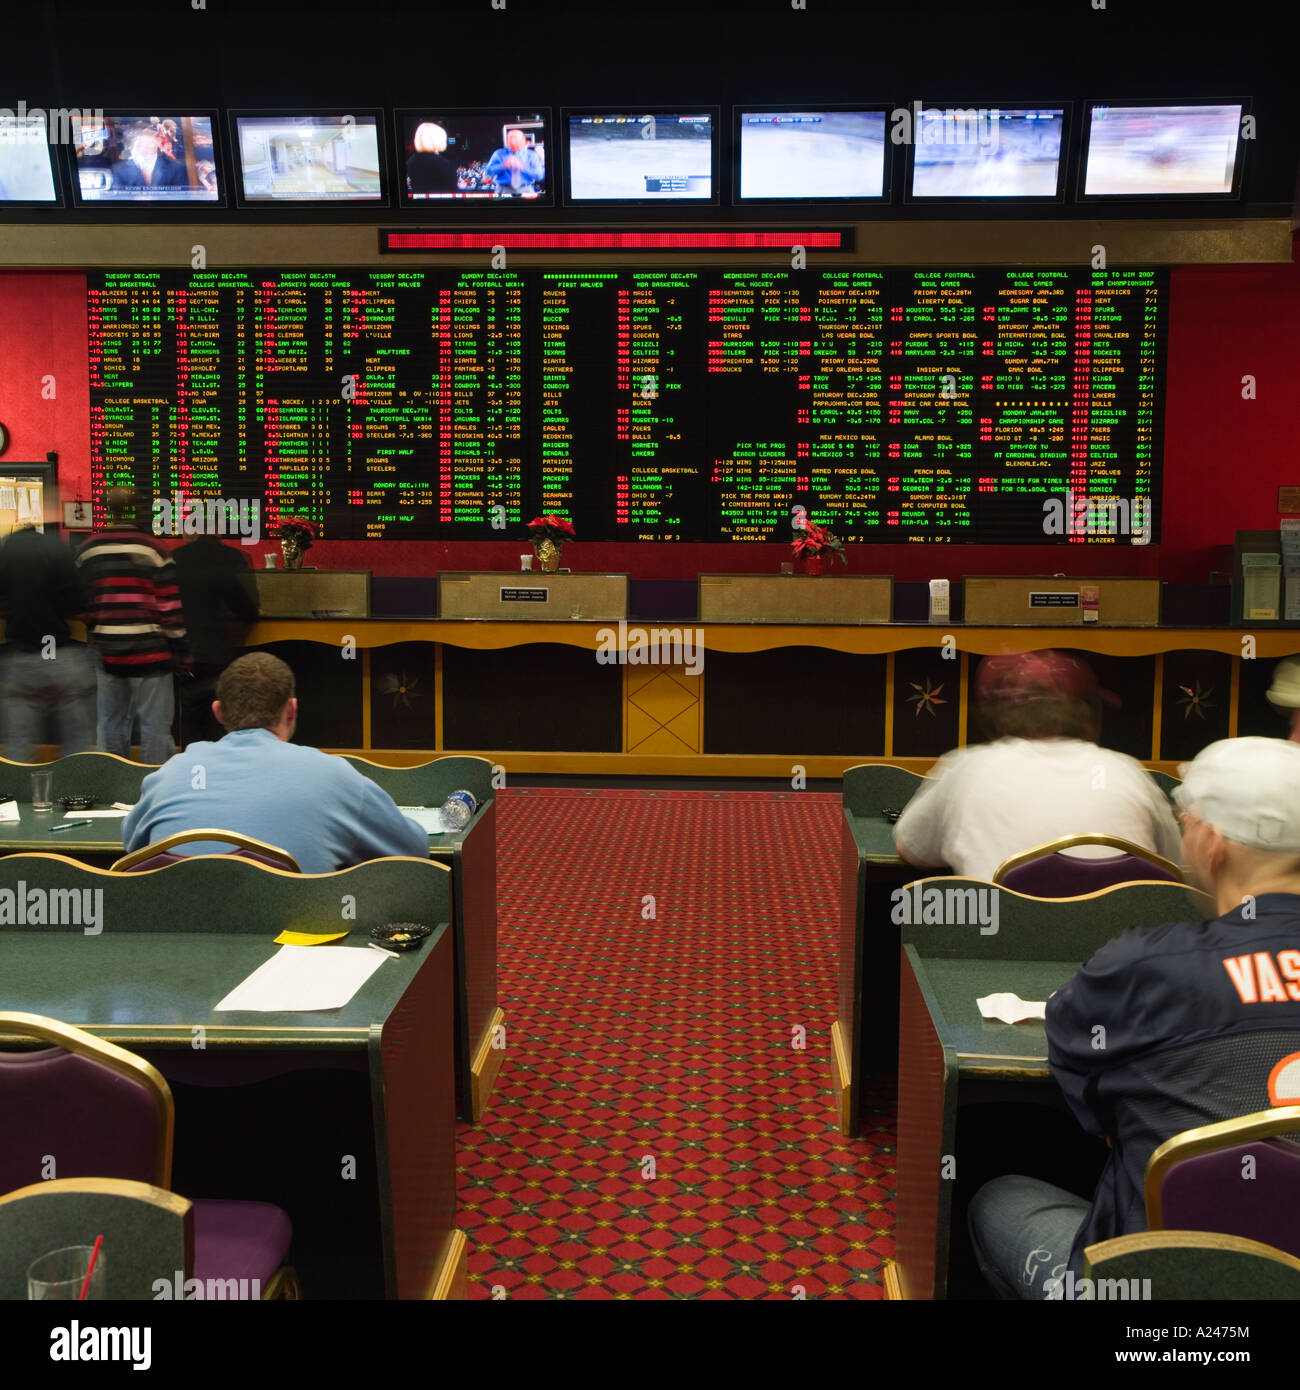 Sports Book in Las Vegas hotel No  release required: distance, back view makes for unrecognizable people in shot Stock Photo